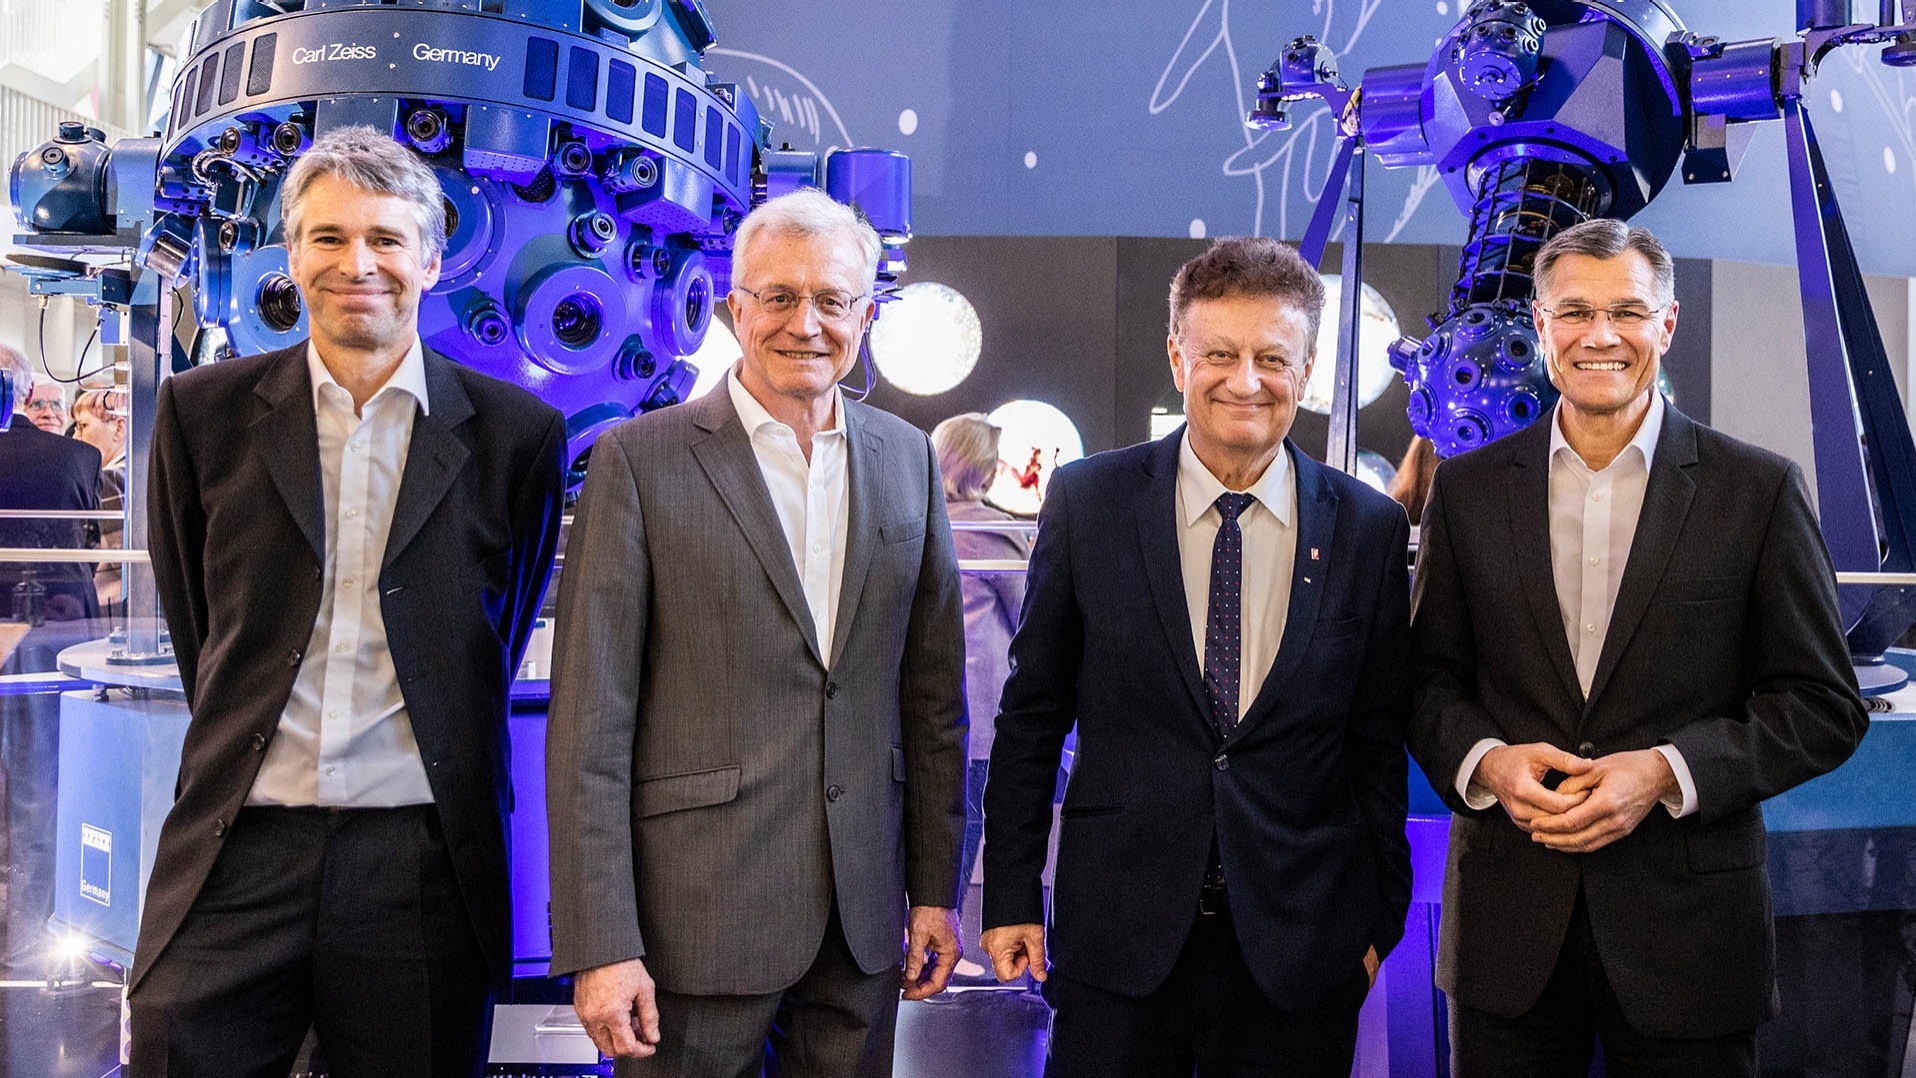 The special exhibition was ceremoniously opened on May 4, 2023, by Dr. Christian Sicka, Curator of Astronomy at the Deutsches Museum in Munich, Martin Kraus, Head of ZEISS Planetariums, the General Director of the Deutsches Museum Prof. Dr. Wolfgang M. Heckl, and Dr. Karl Lamprecht, CEO of the ZEISS Group (from left).